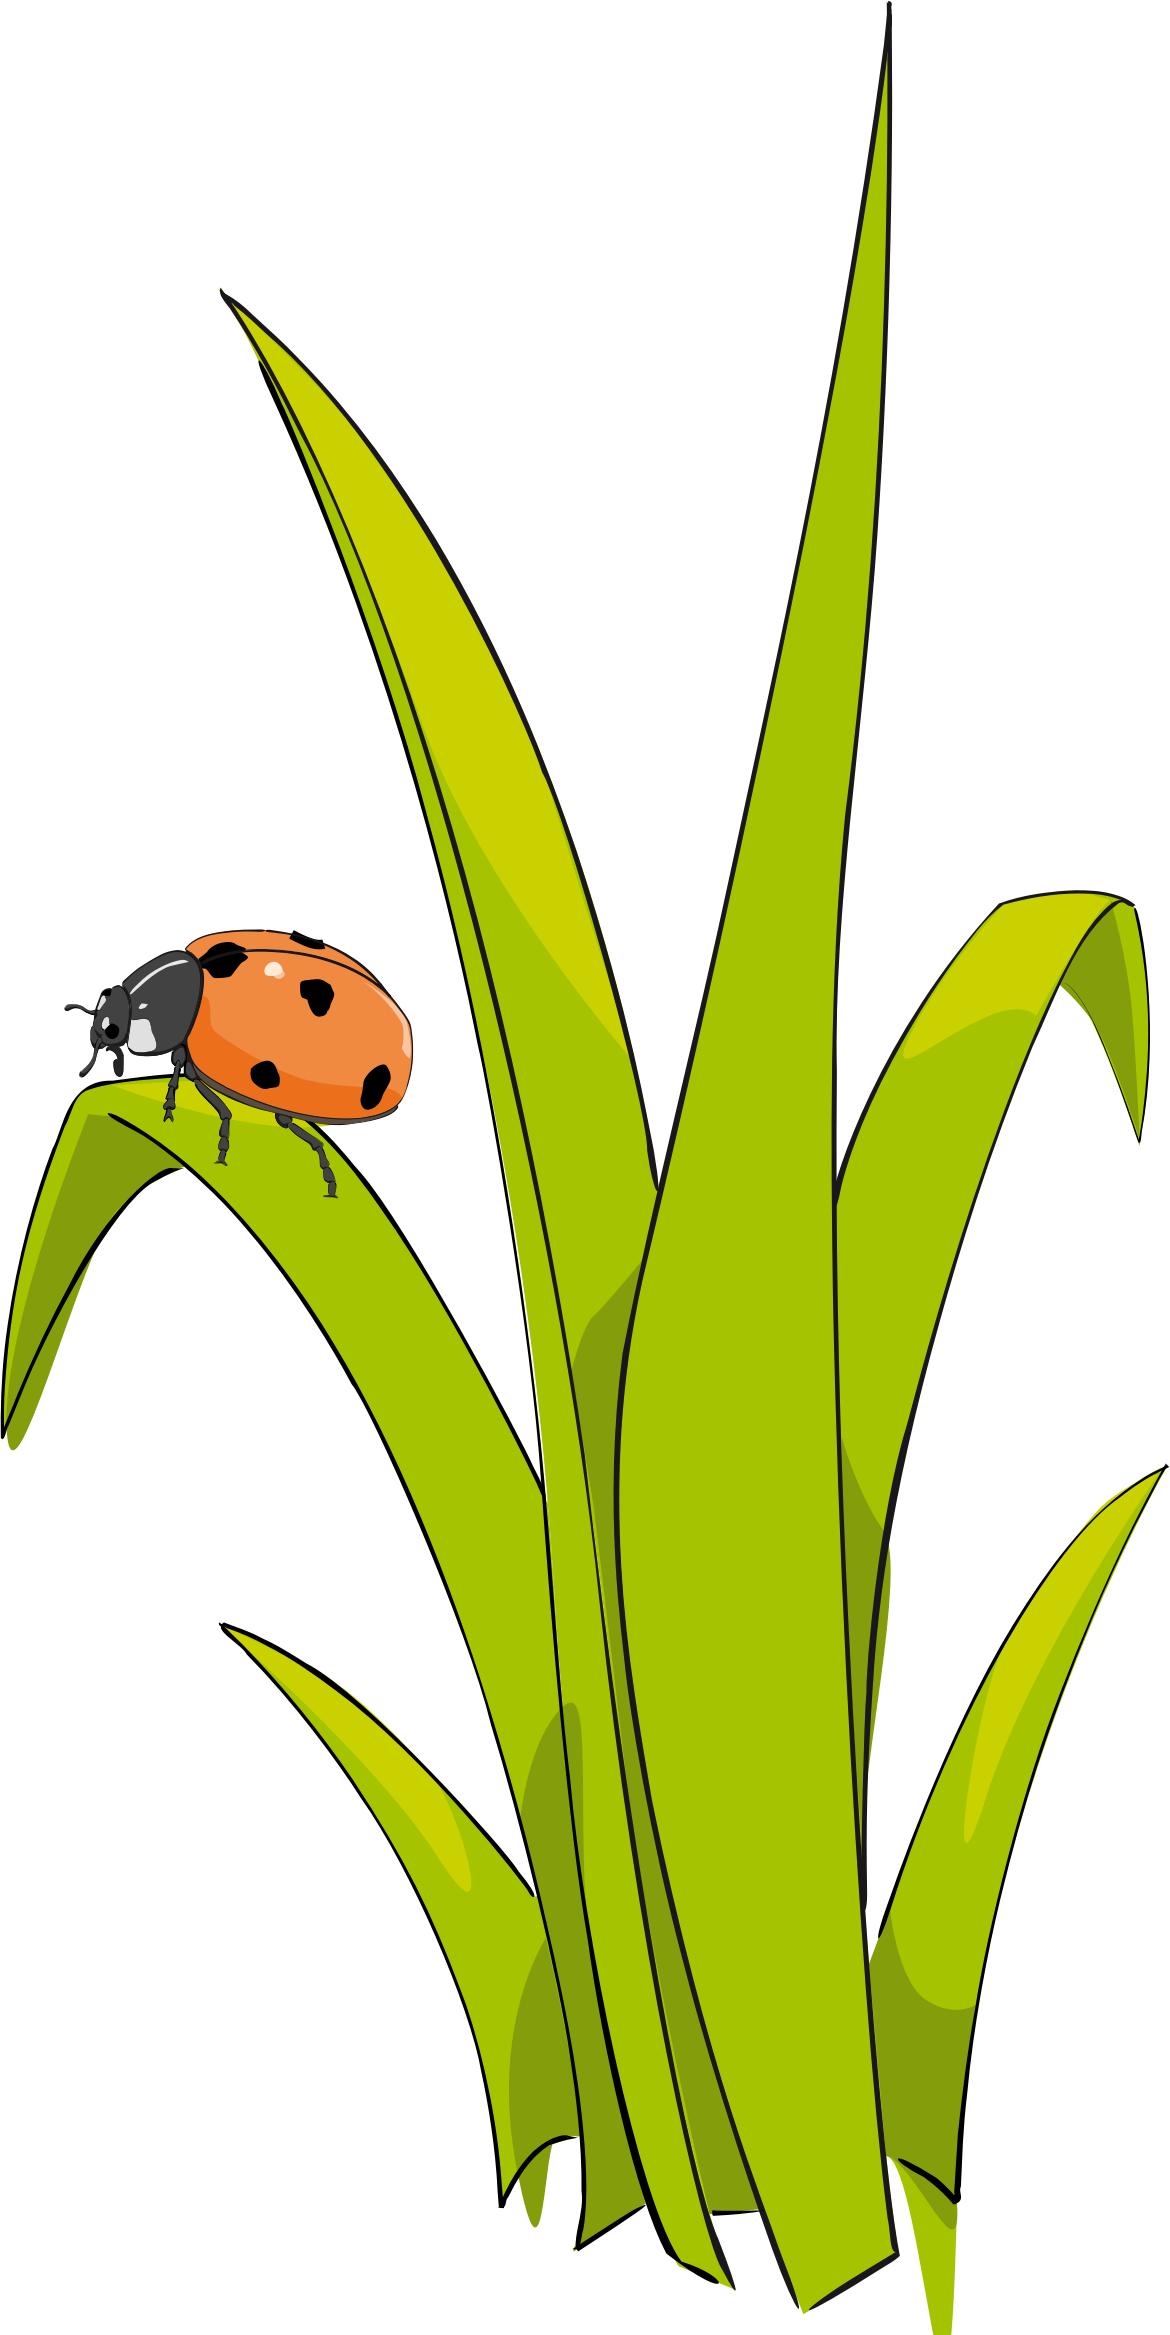 Coccinelle sur brin d-herbe - Ladybird on blade of grass. Icons PNG ...